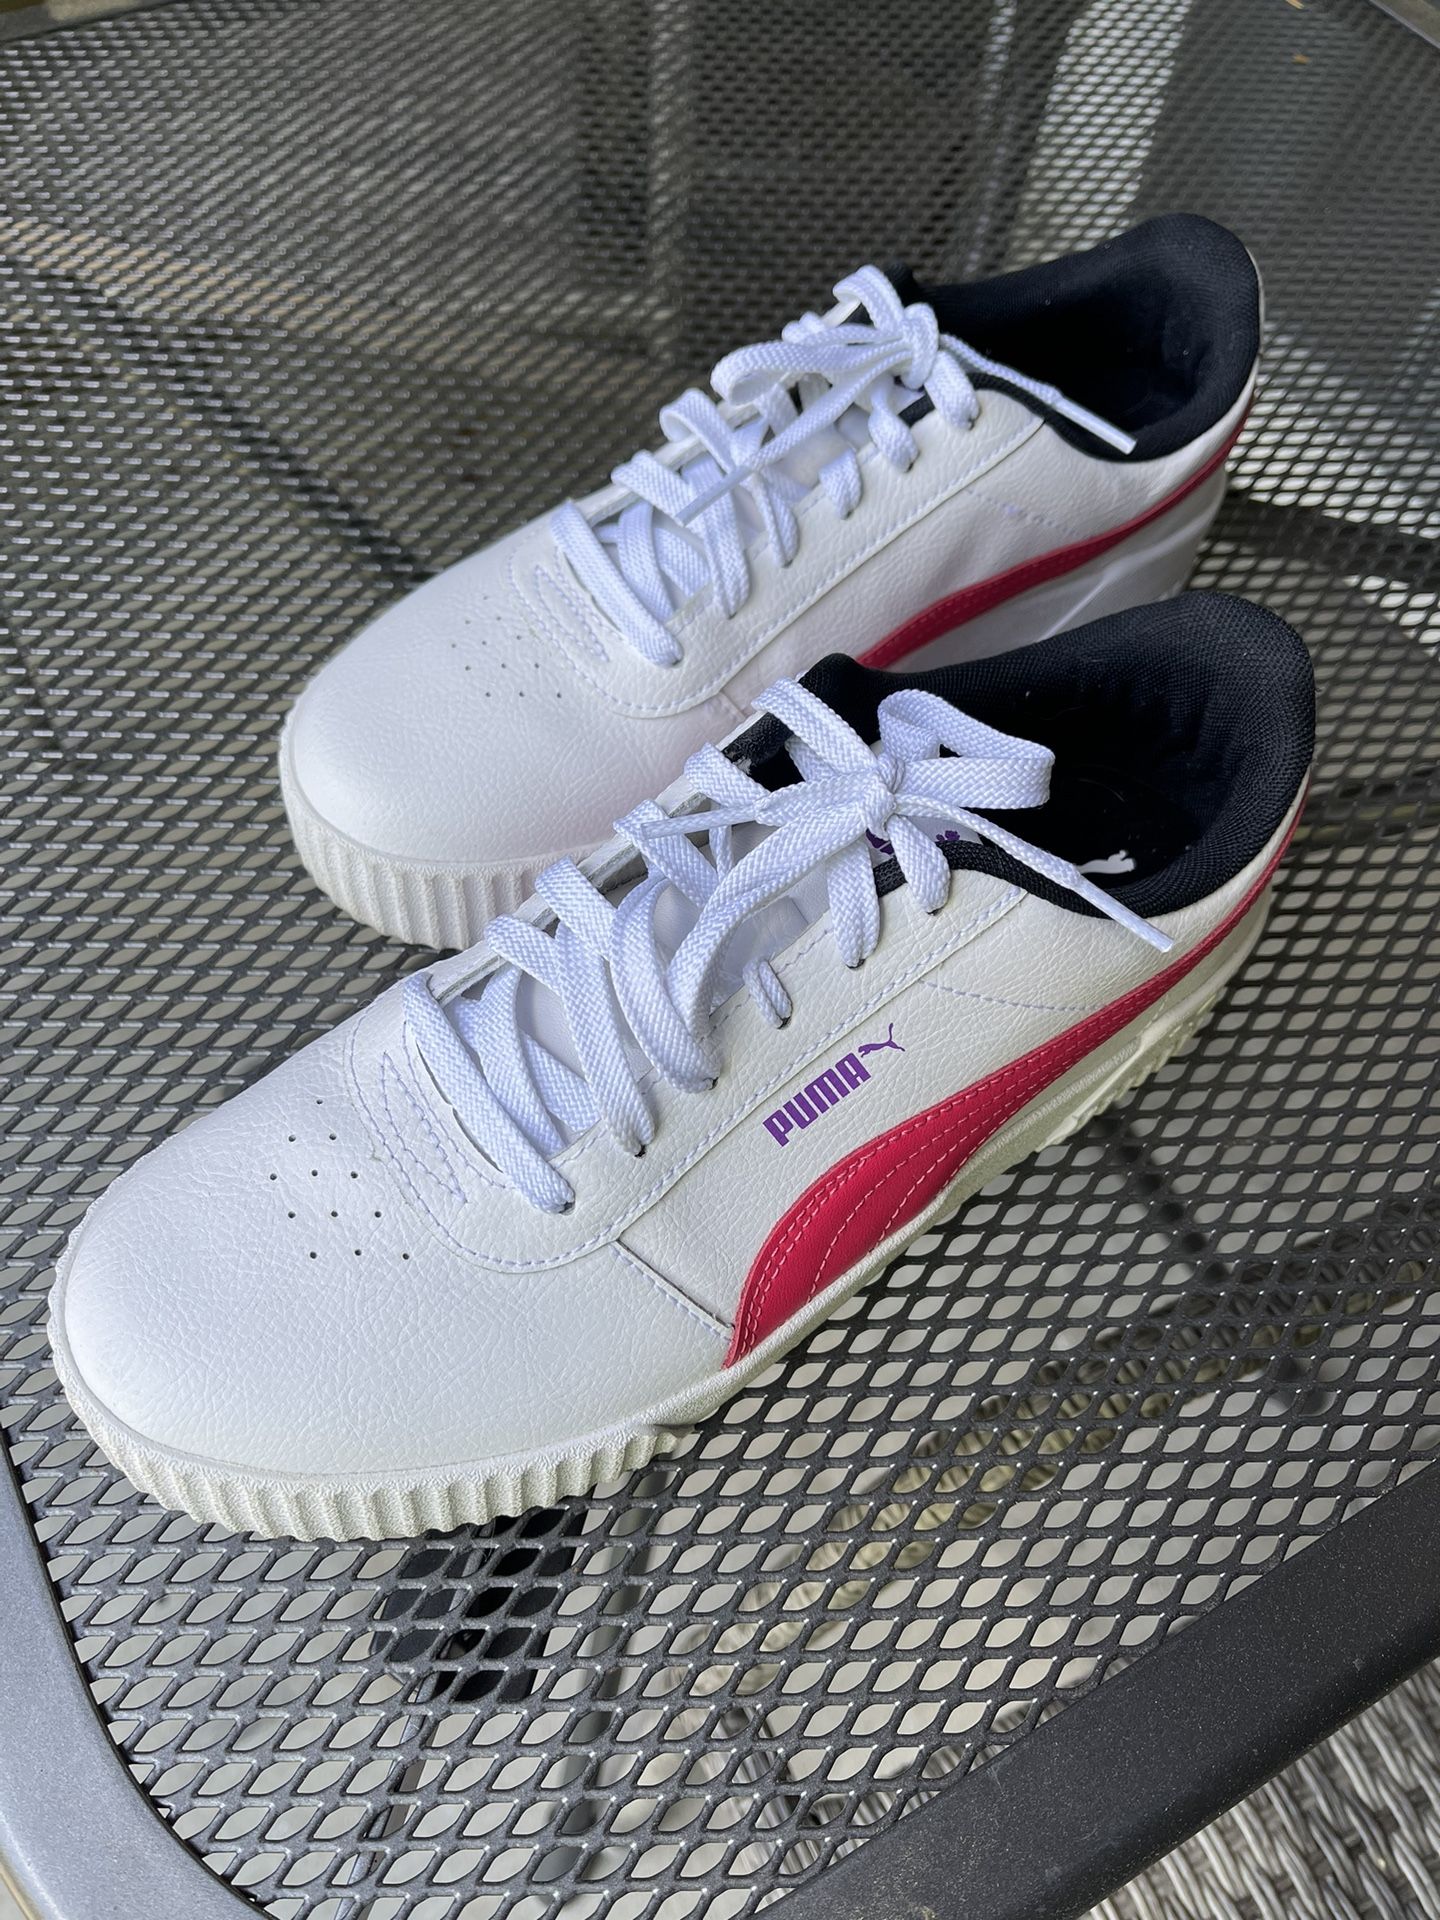 Women’s Puma Shoes Worn Once 